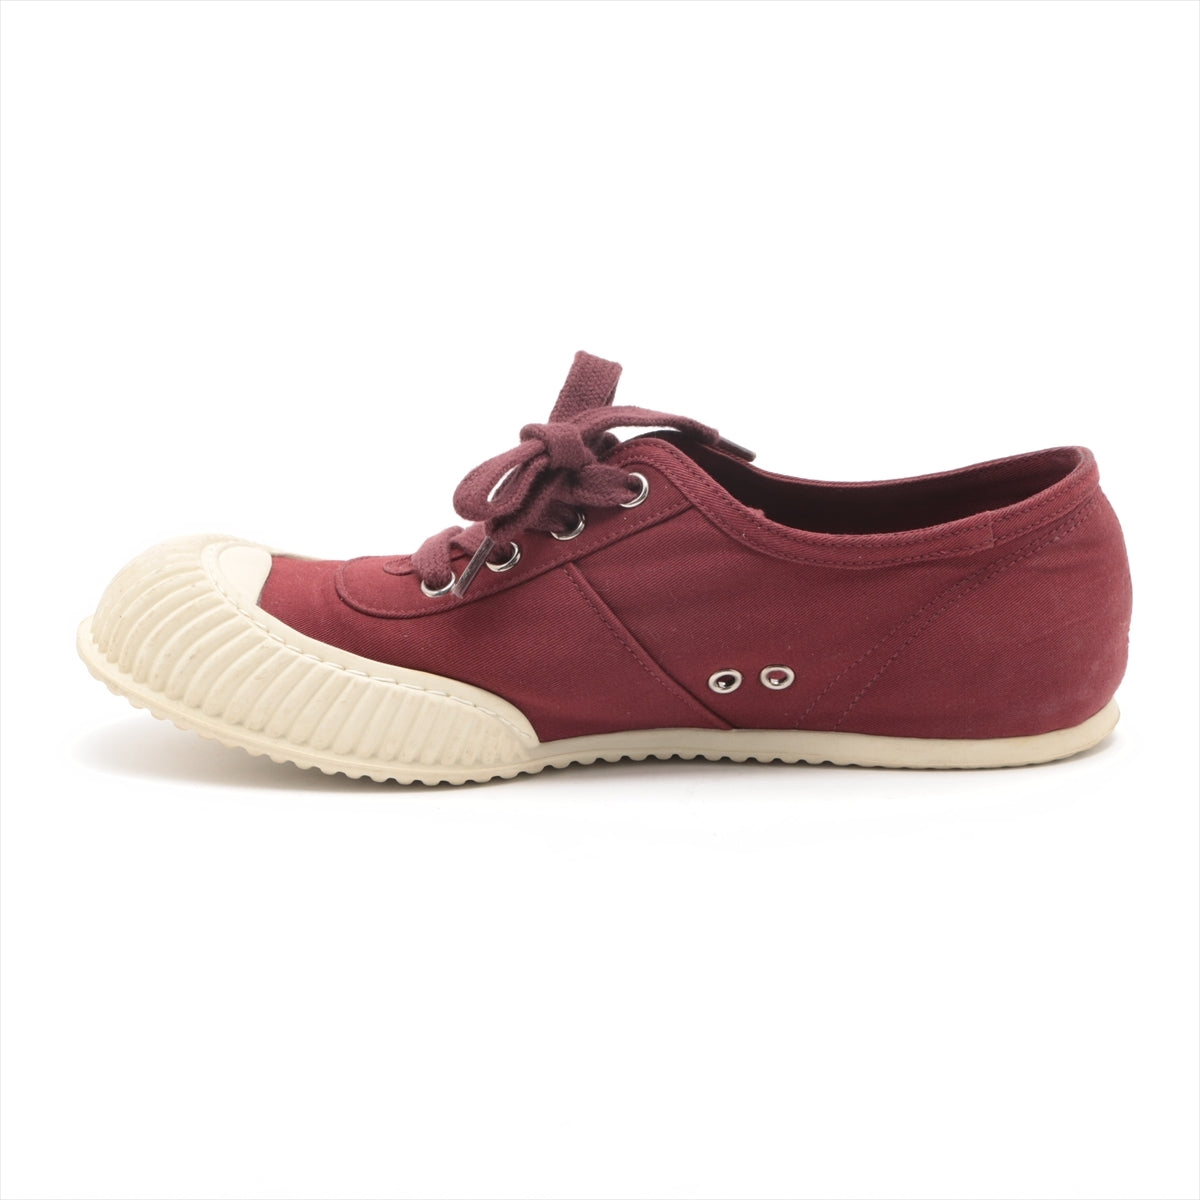 Prada Sport canvas Sneakers Size notation disappeared Ladies' Red